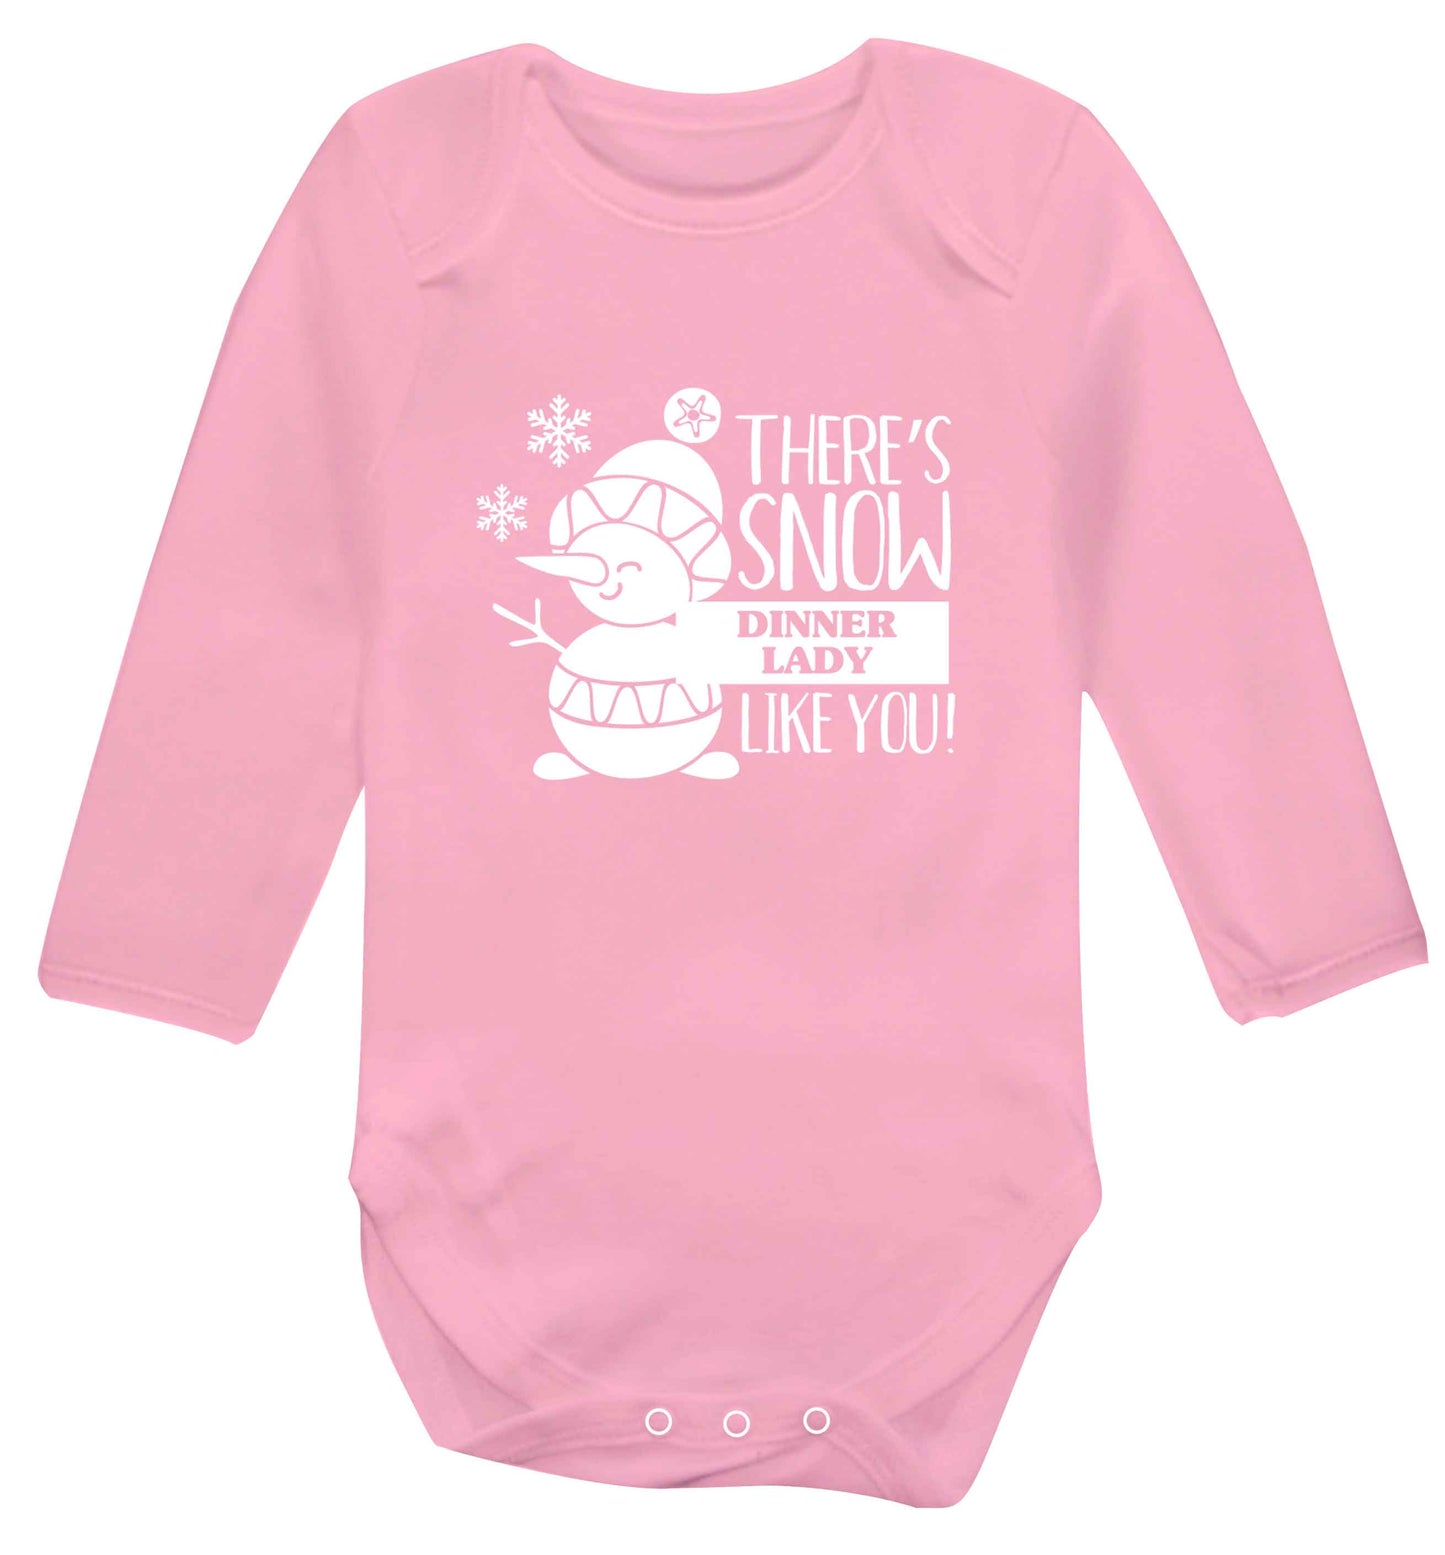 There's snow dinner lady like you baby vest long sleeved pale pink 6-12 months